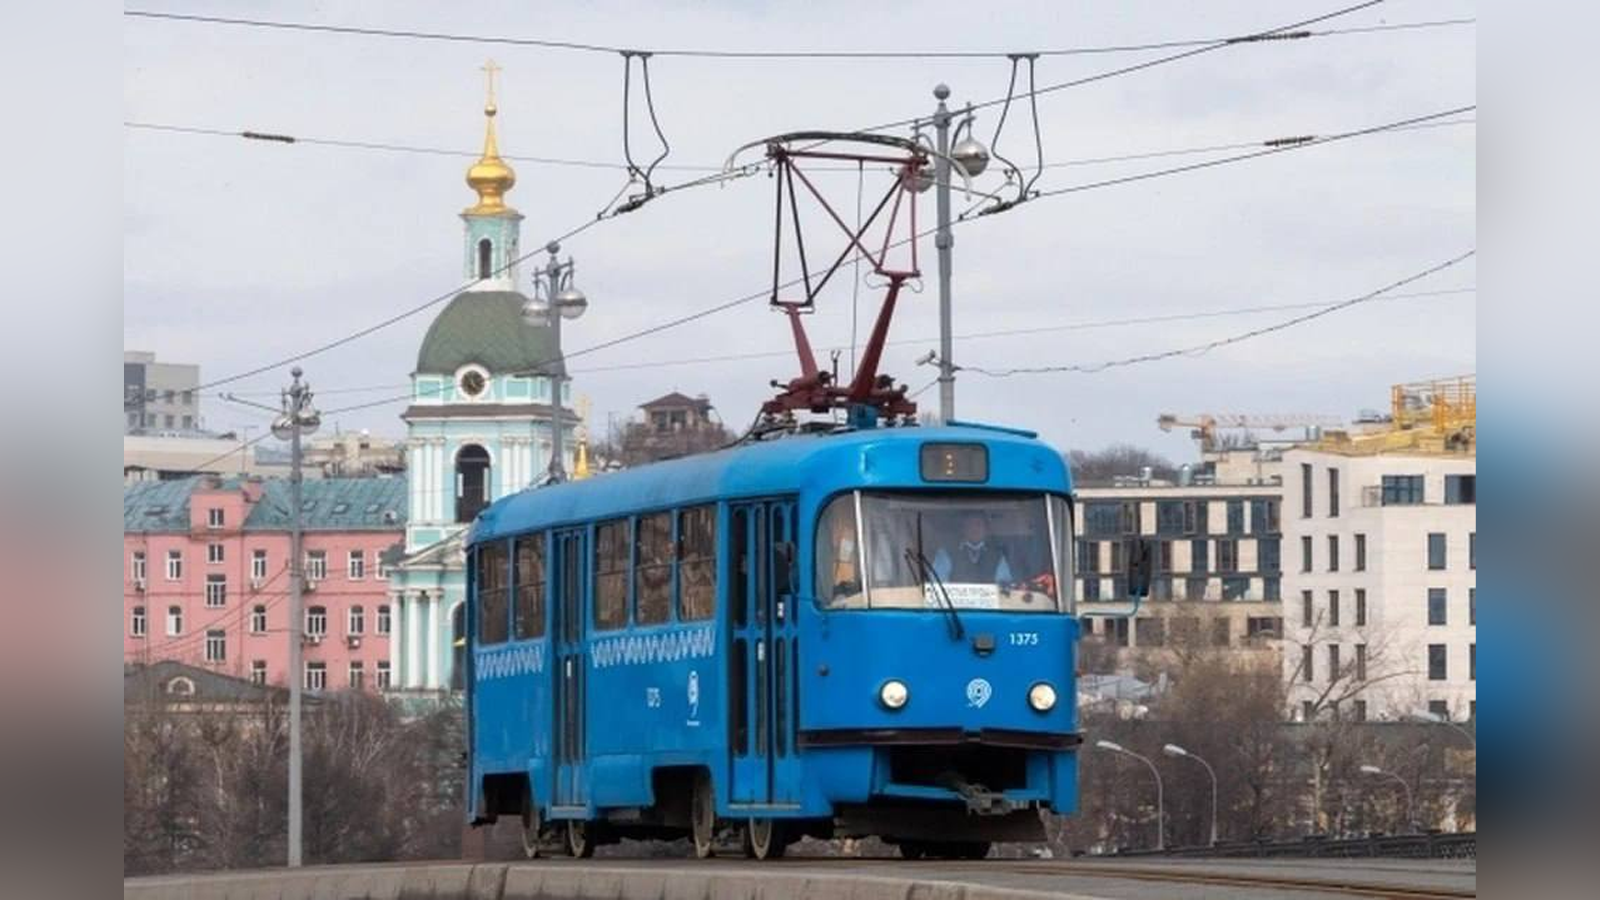 Ufa was given old trams from Moscow